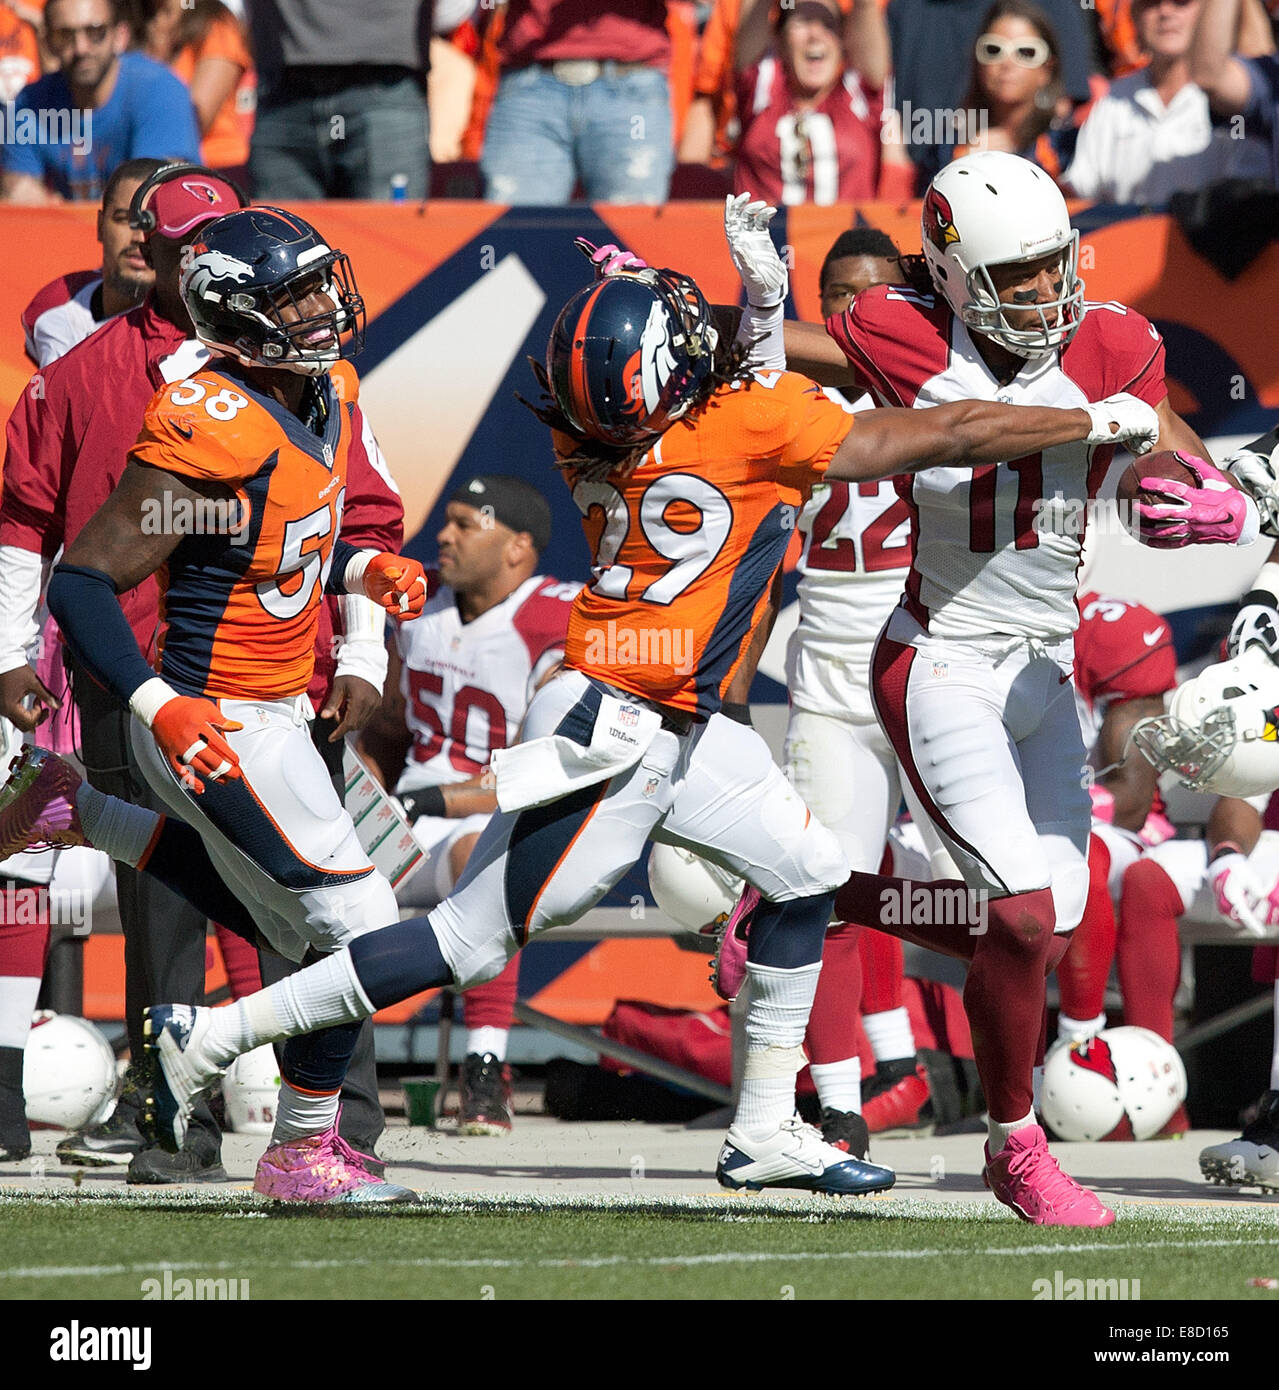 Denver, Colorado, USA. 5th Oct, 2014. Cardinals WR LARRY FITZGERALD, right, catches a pass over Broncos CB BRADLEY ROBY, center, during the 1st. half at Sports Authority Field at Mile High Sunday afternoon. The Broncos beat the Cardinals 41-20. Credit:  Hector Acevedo/ZUMA Wire/Alamy Live News Stock Photo